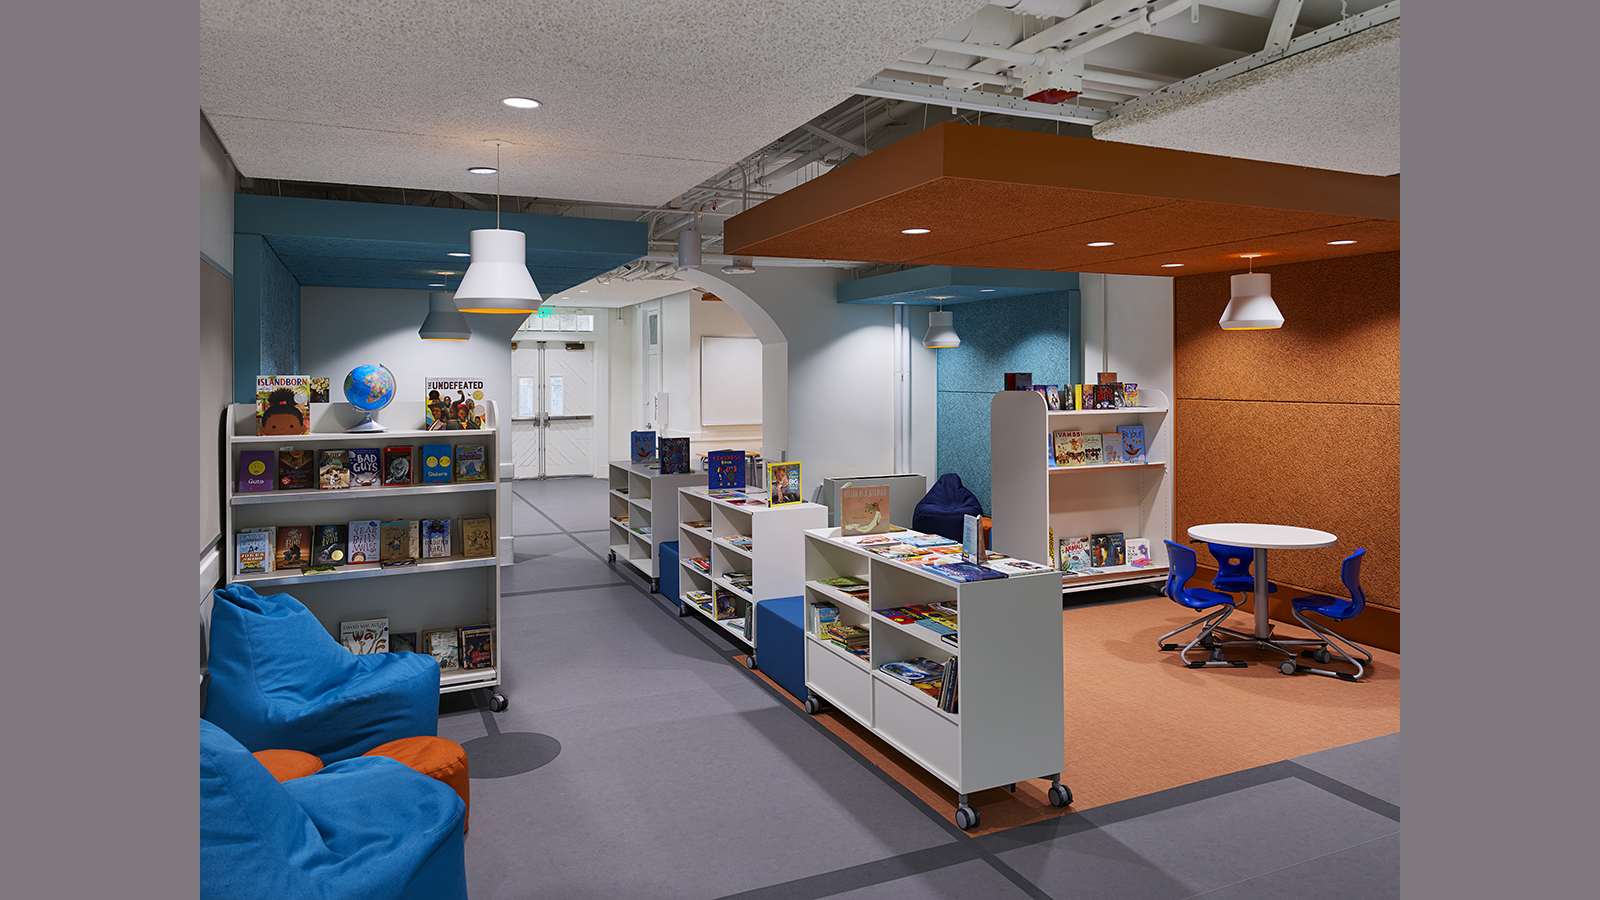 Creative Minds International Public Charter School, seating area with bookshelves and colorful orange, and blue walls